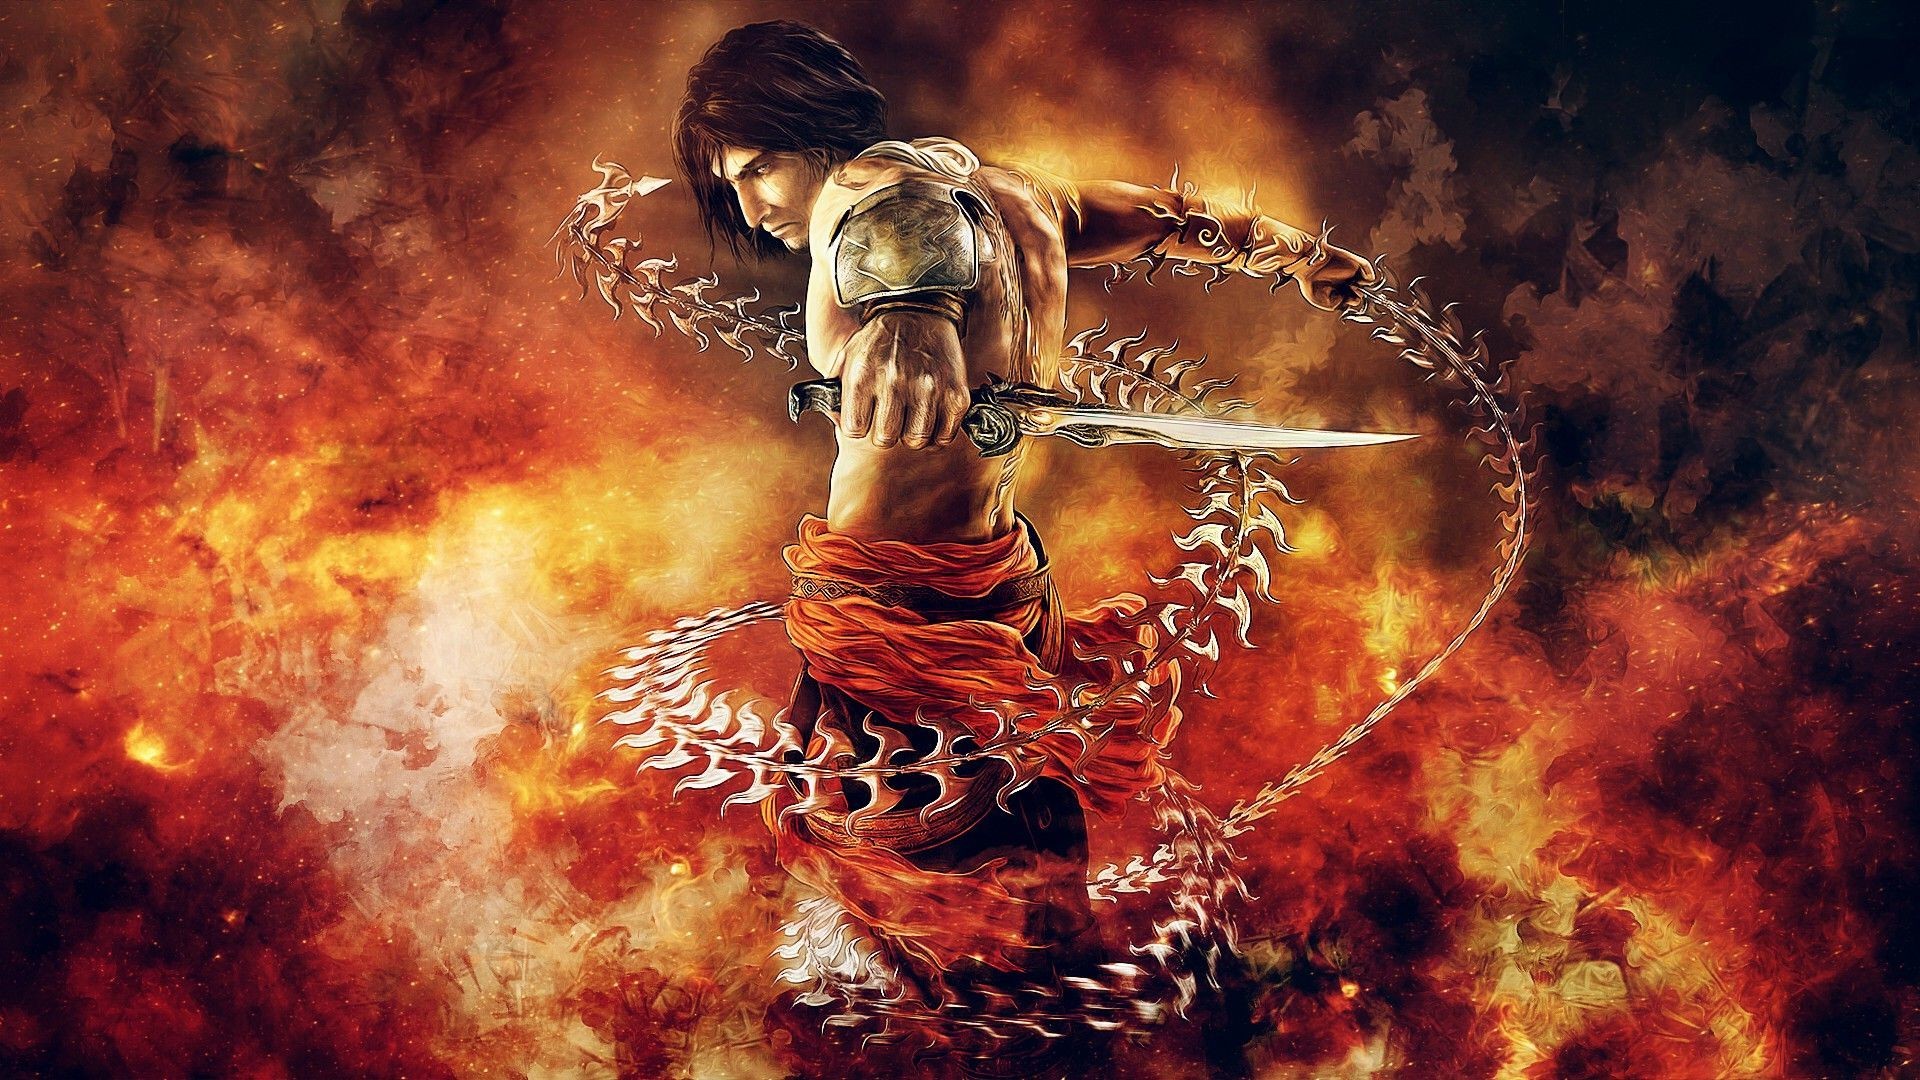 Prince of Persia: Warrior Within wallpaper #26715